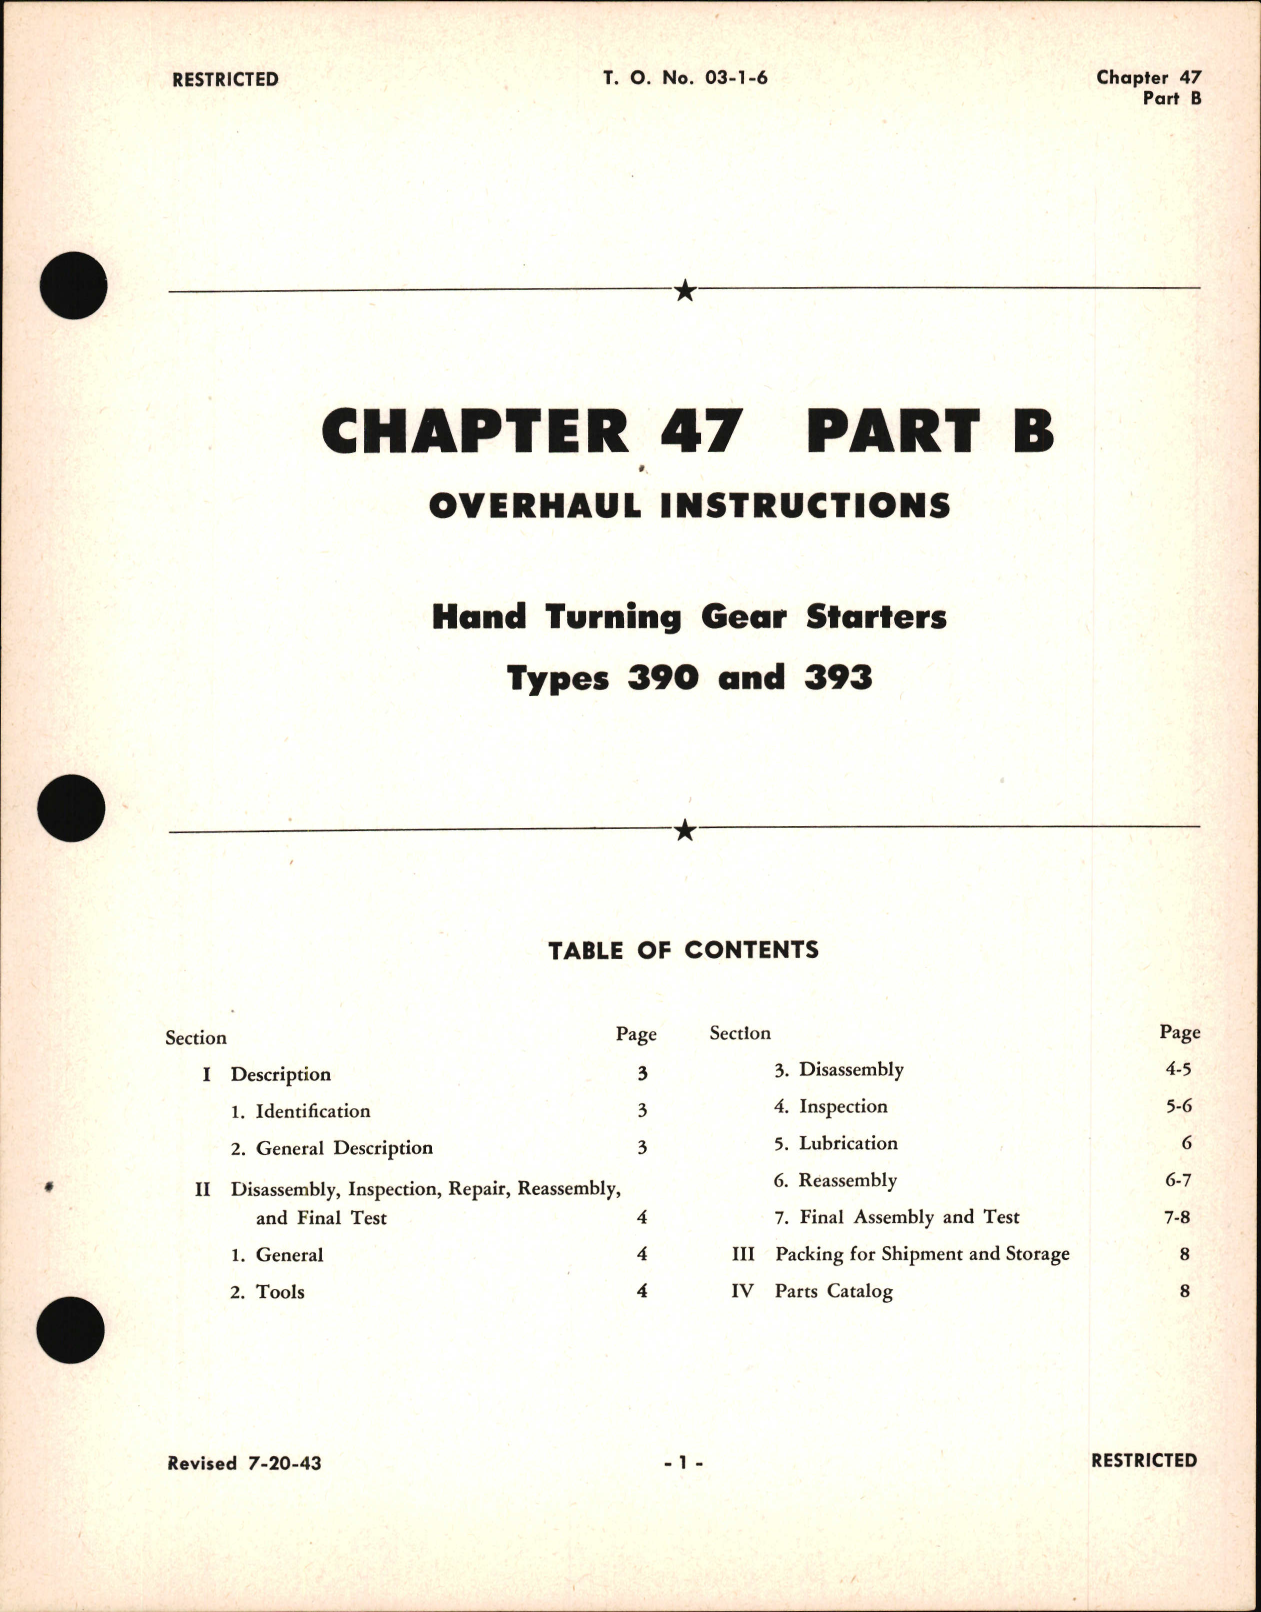 Sample page 1 from AirCorps Library document: Overhaul Instructions for Hand Turning Gear Starters, Chapter 47 Part B